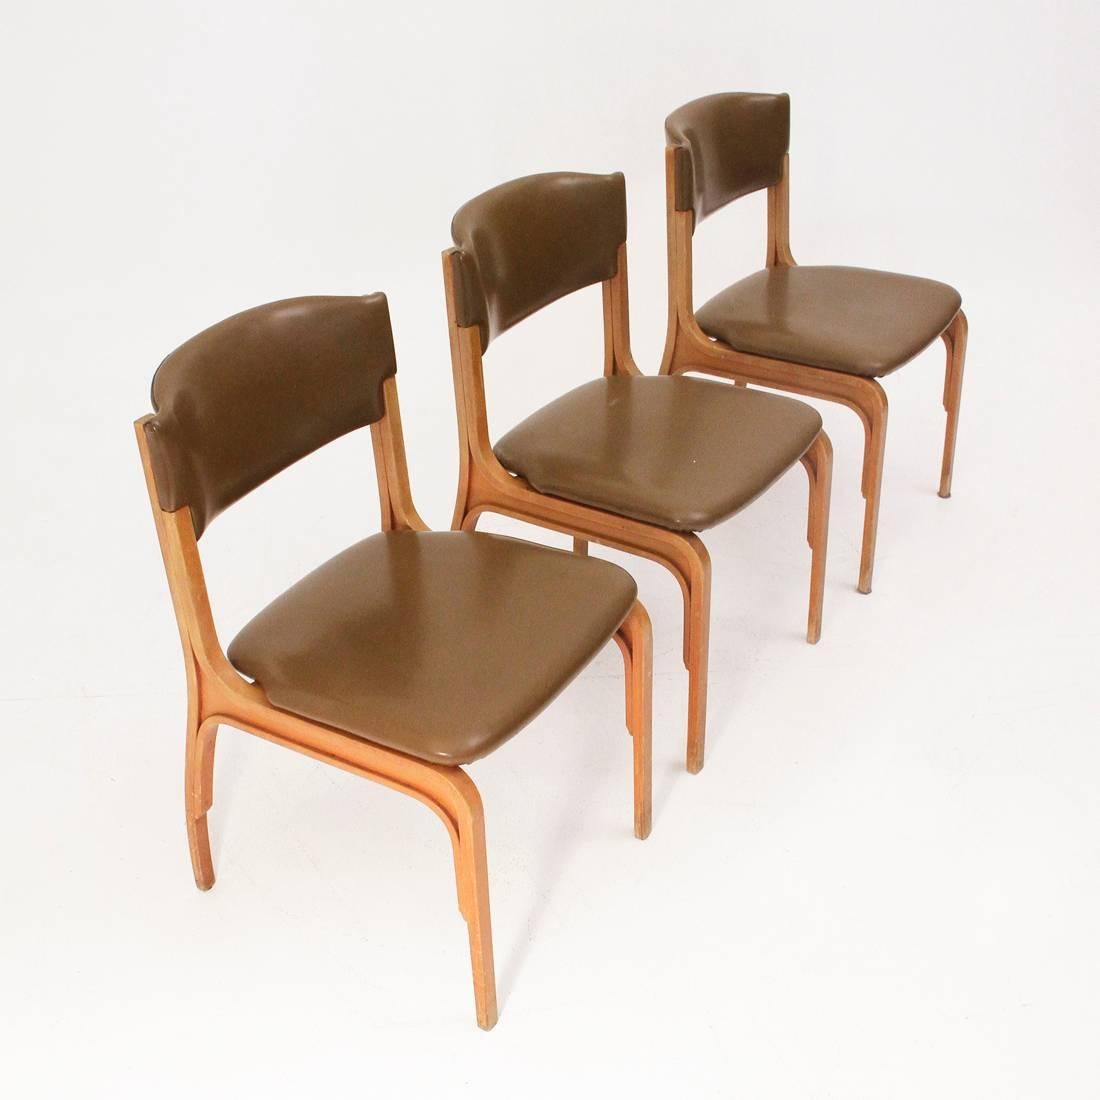 Set of chairs, produced by Cantieri Carugati and designed by Gianfranco Frattini.
Frame, wood and bentwood.
Seat and backrest padded and lined in vinyl.

Dimensions: width 45 cm, depth 45 cm, height 79 cm, seat height 45 cm.